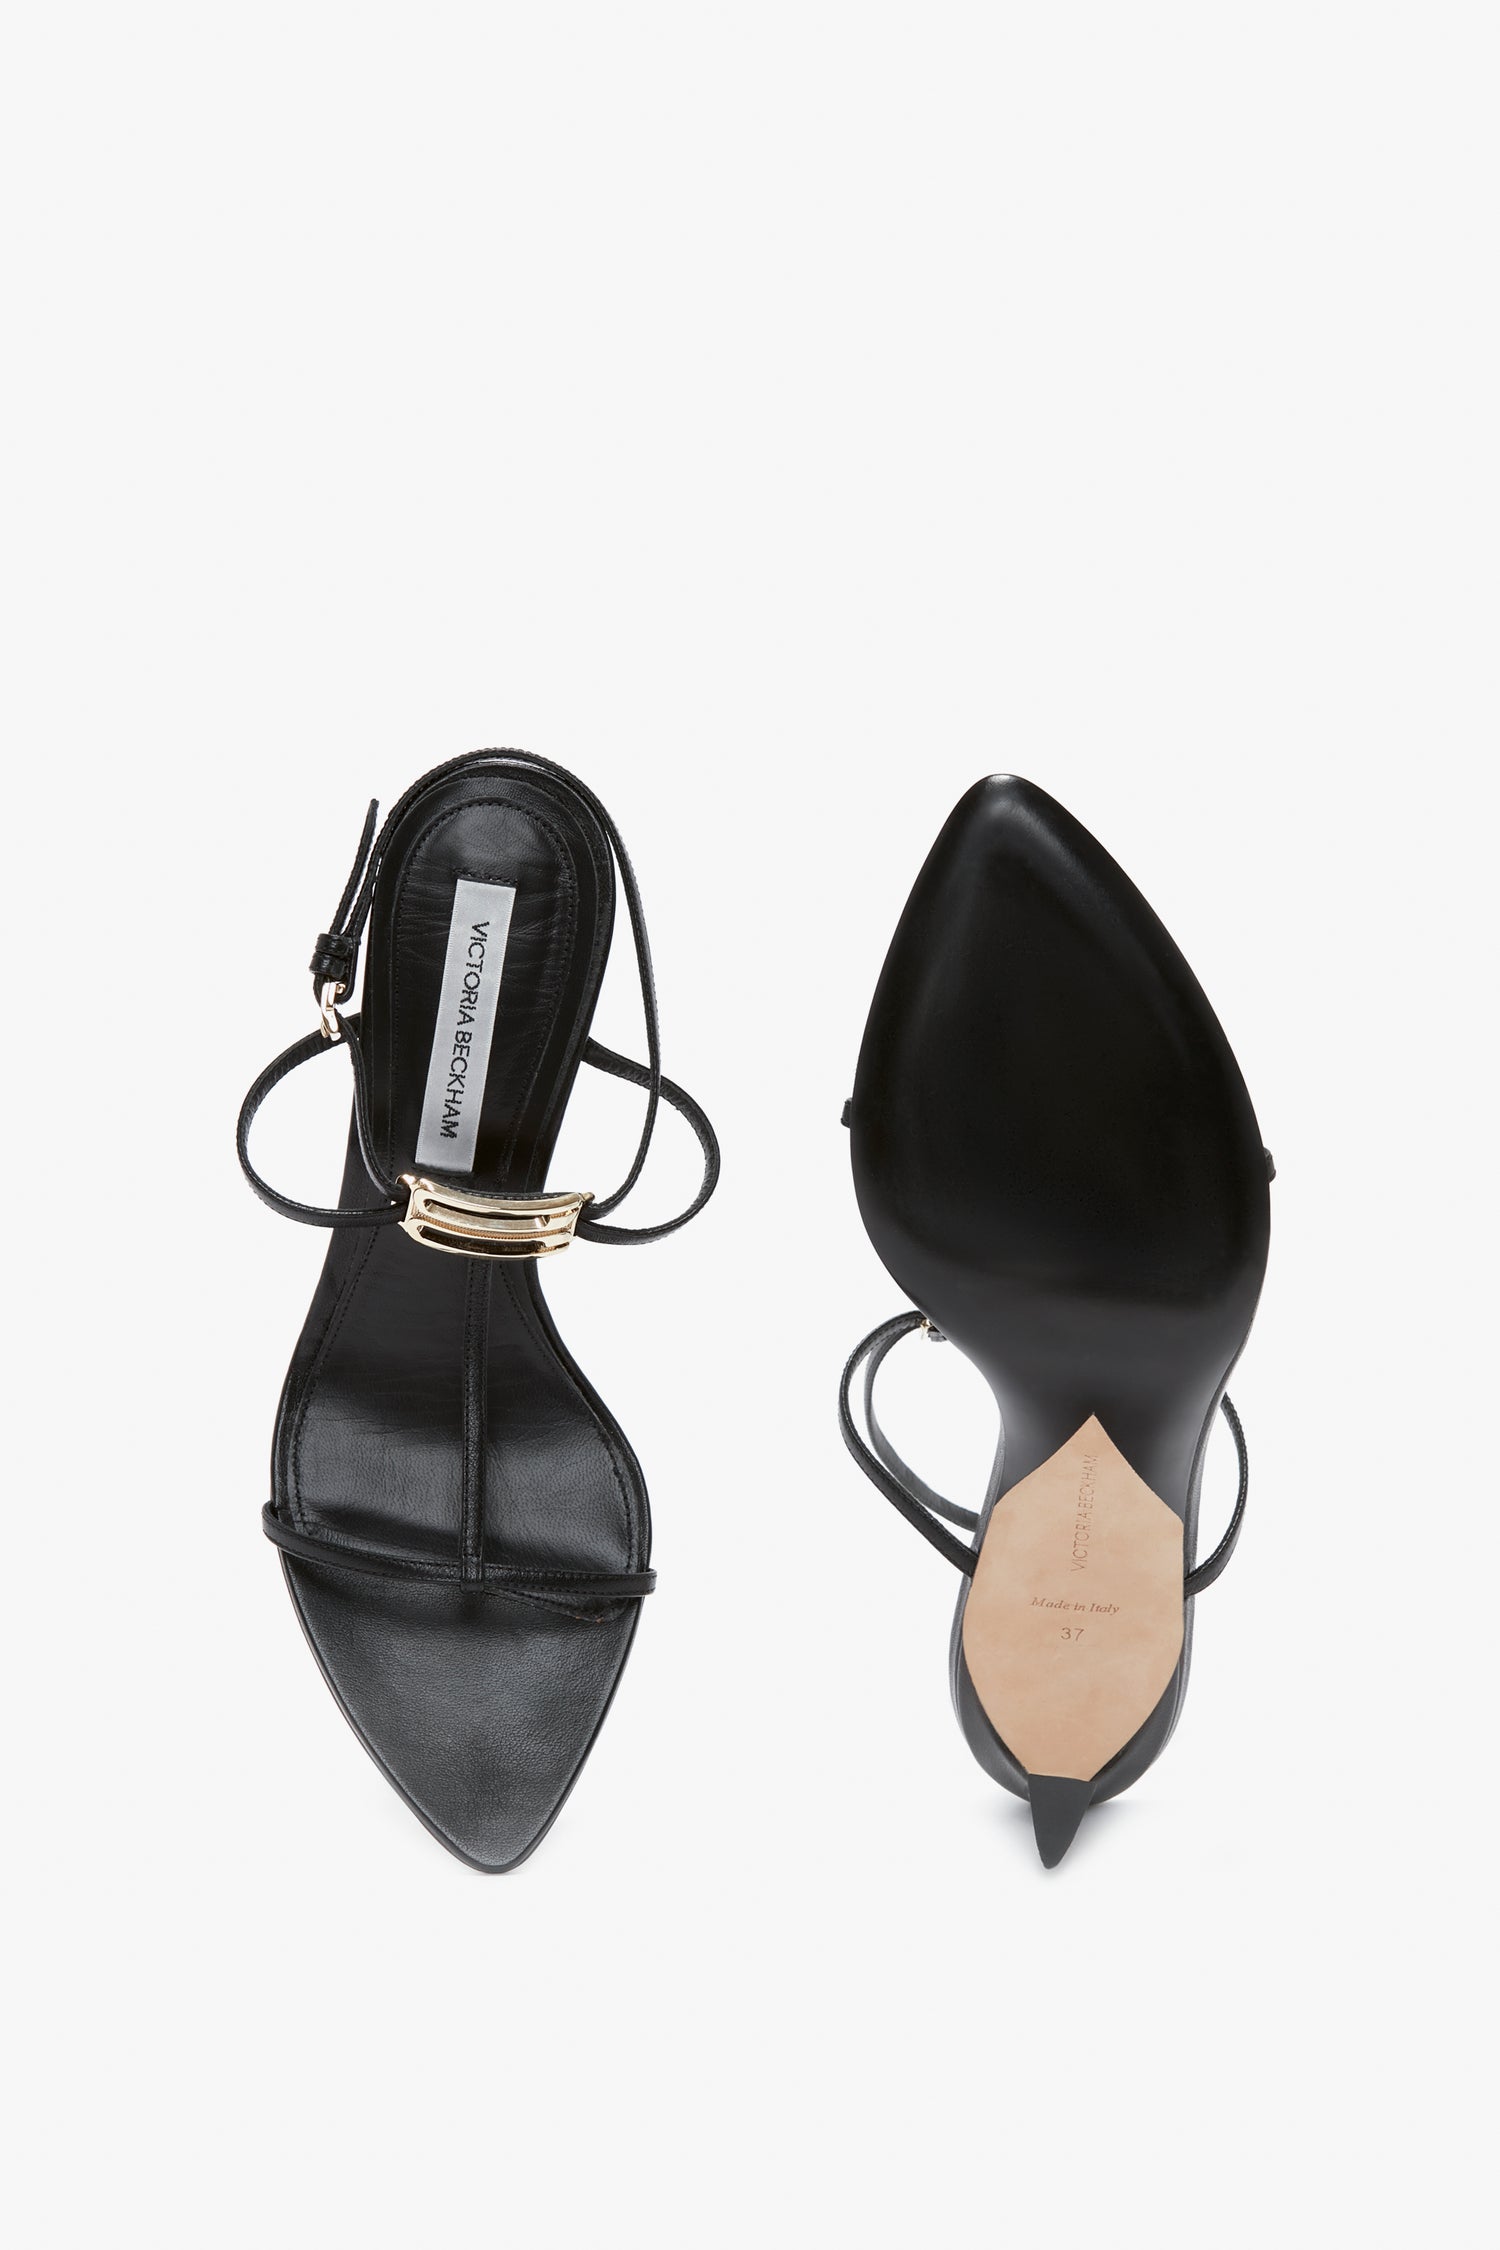 Top and bottom view of a pair of black high-heeled strappy sandals, featuring pointed toes and a gold buckle on the adjustable ankle strap. The shoes boast sculptural heels that add an artistic flair to the design. Introducing the **Frame Detail Sandal In Black Leather** by **Victoria Beckham**.